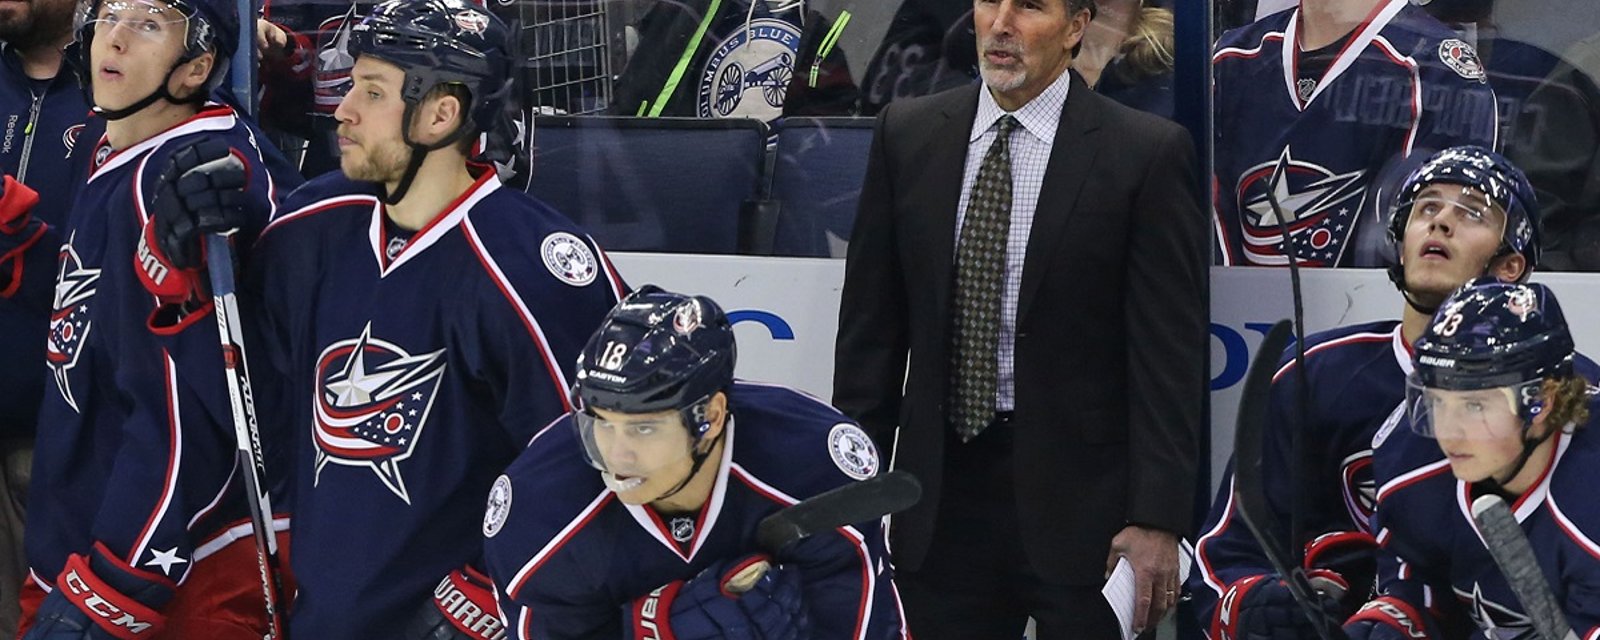 Breaking: Blue Jackets announce three signings on Tuesday.